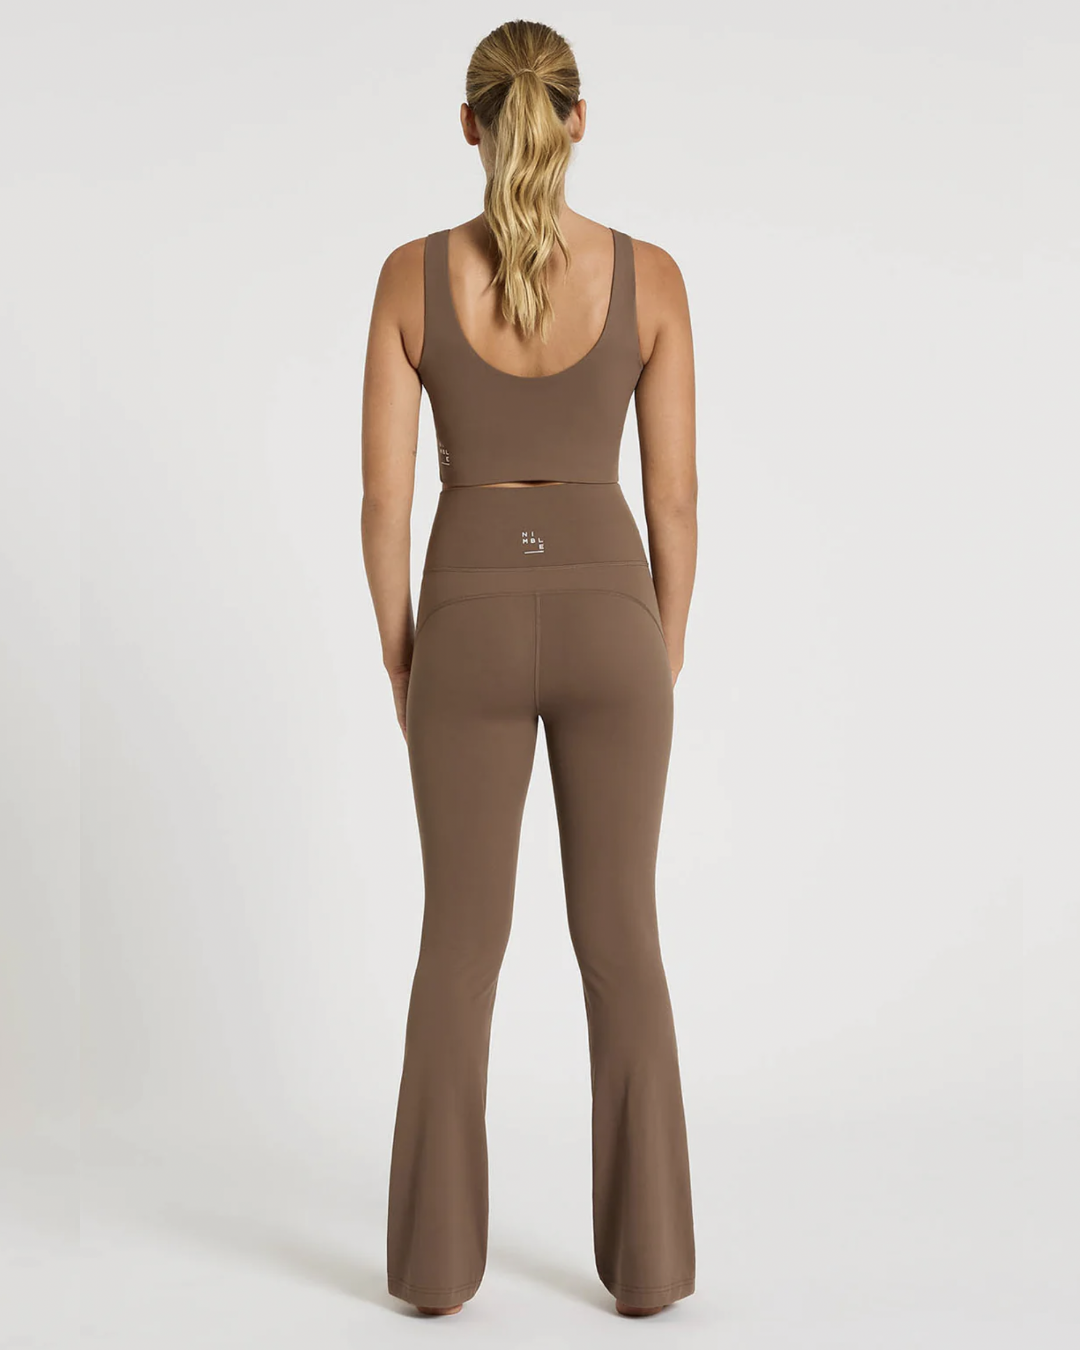 In Motion Flare Pant - Mocha Activewear by Nimble - Prae Wellness